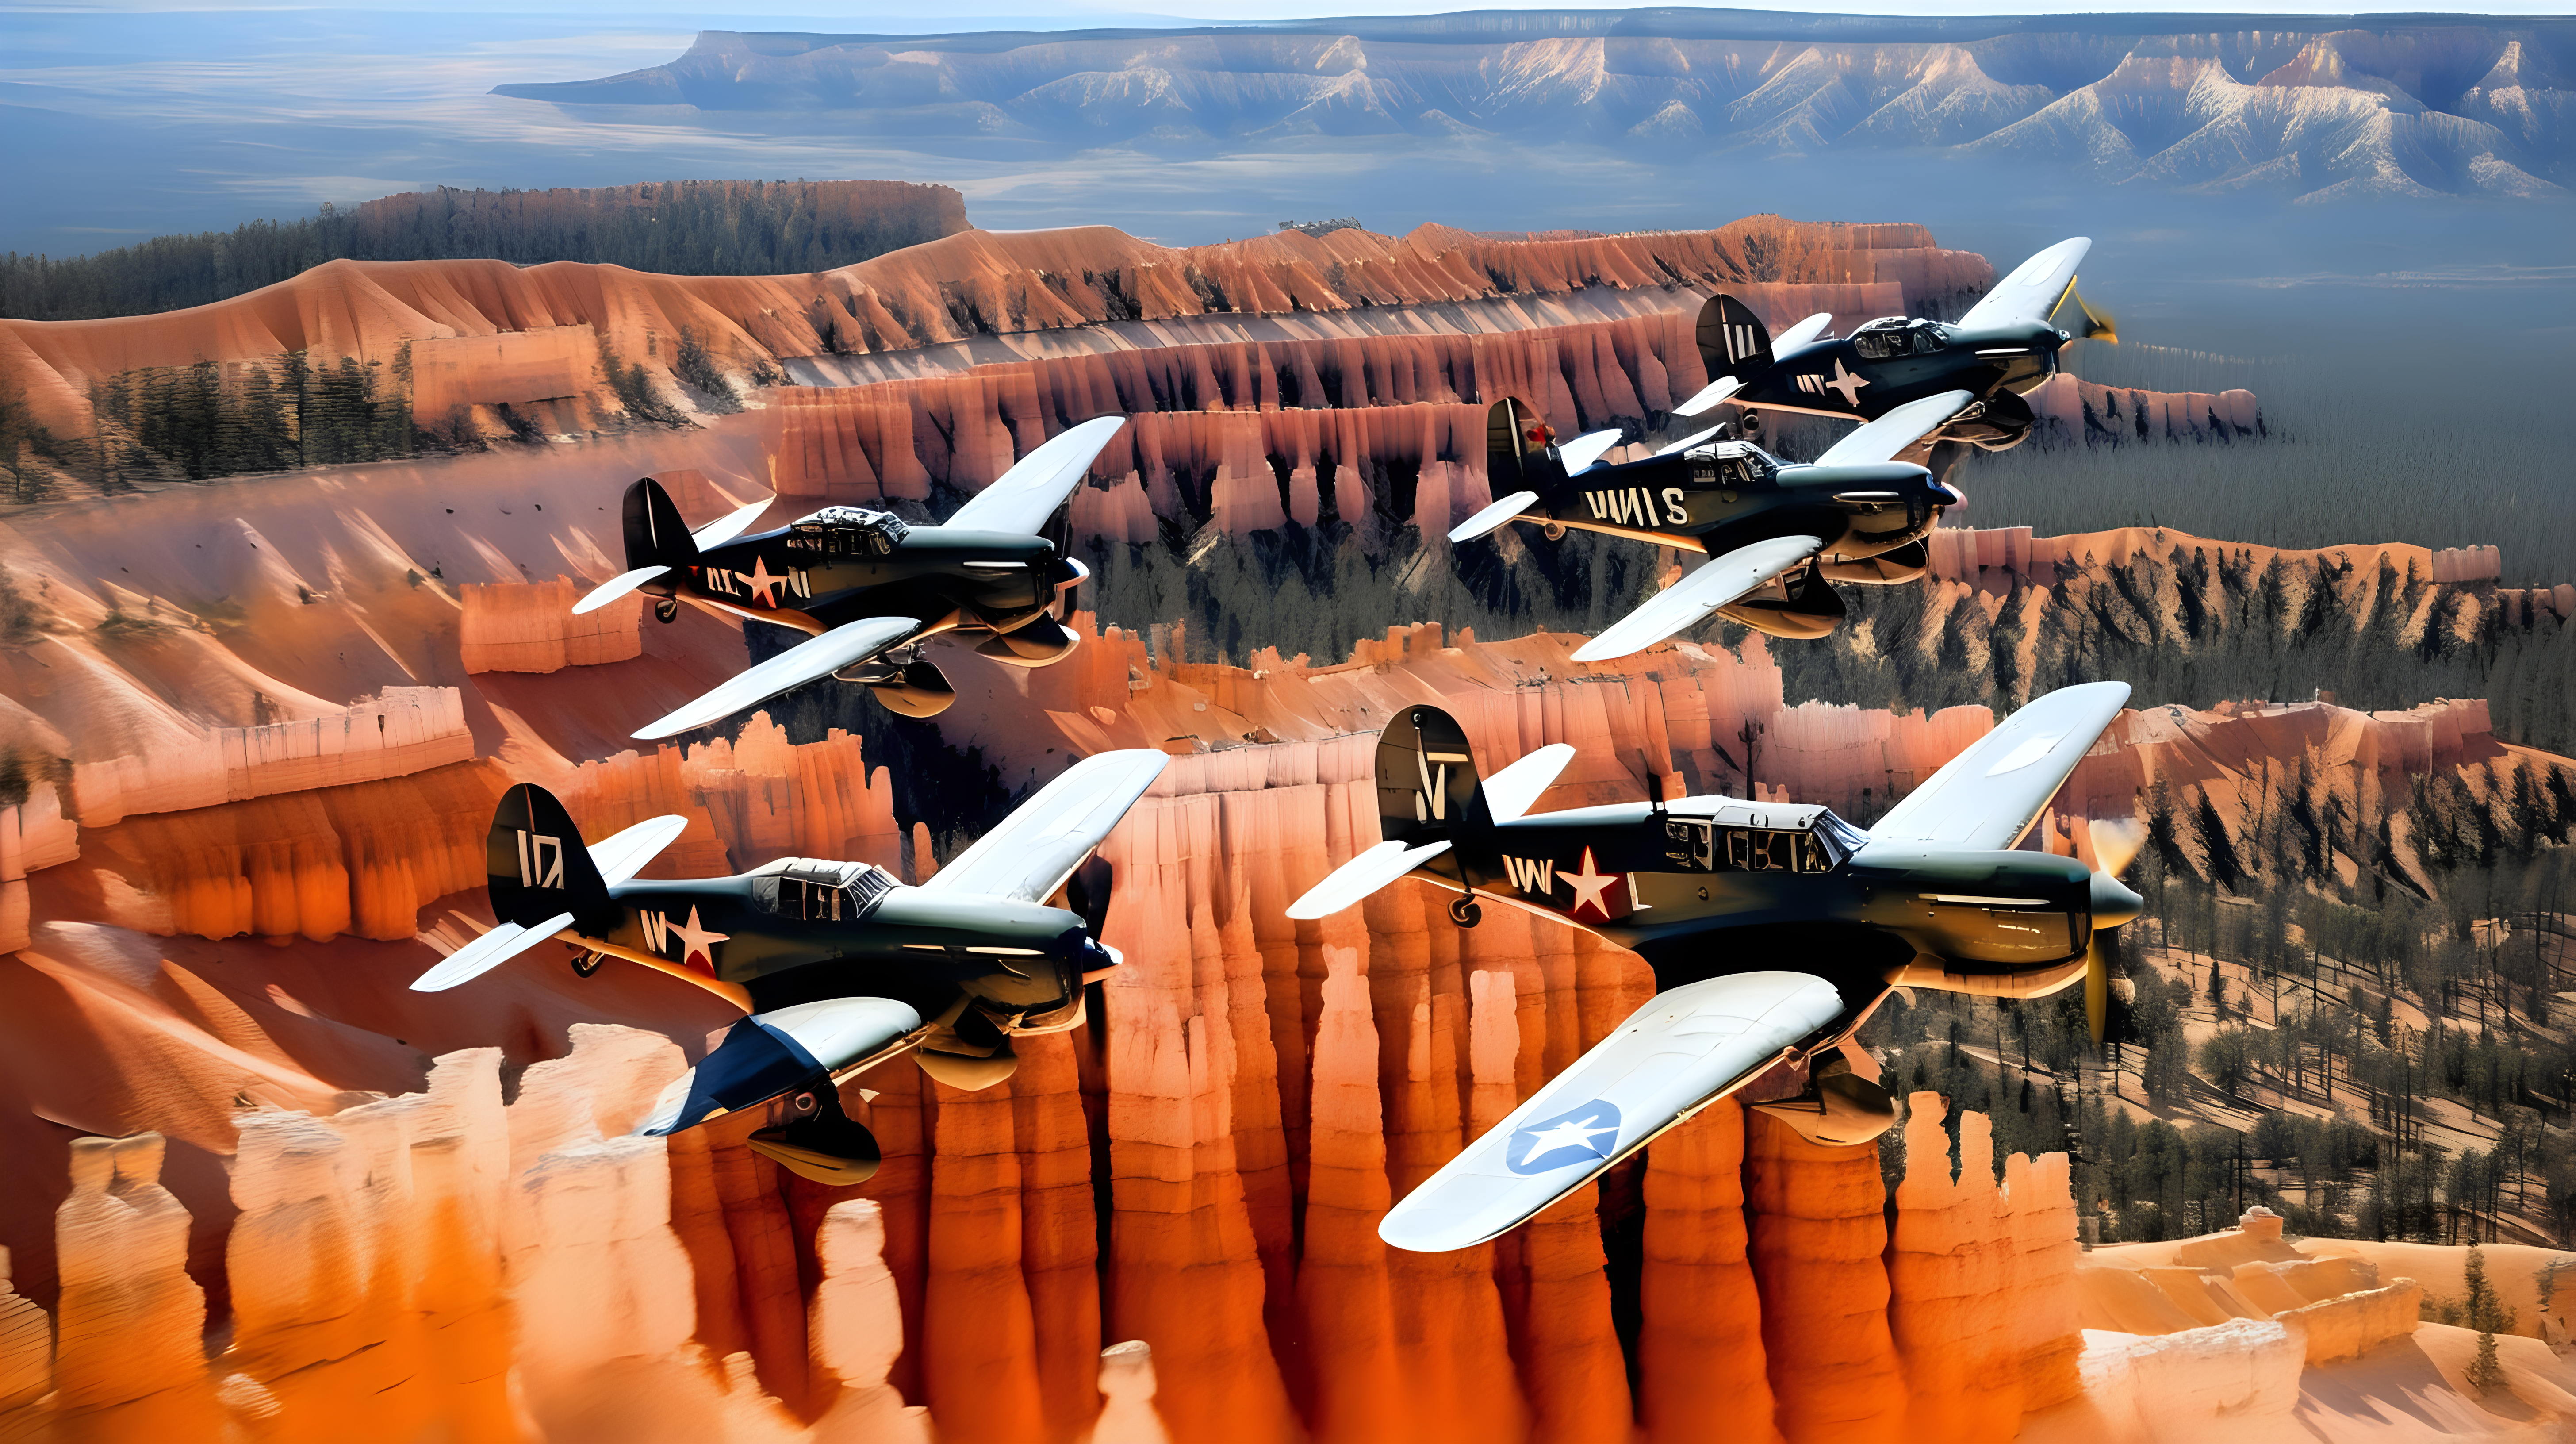 Squadron of WW2 planes flying over Bryce Canyon